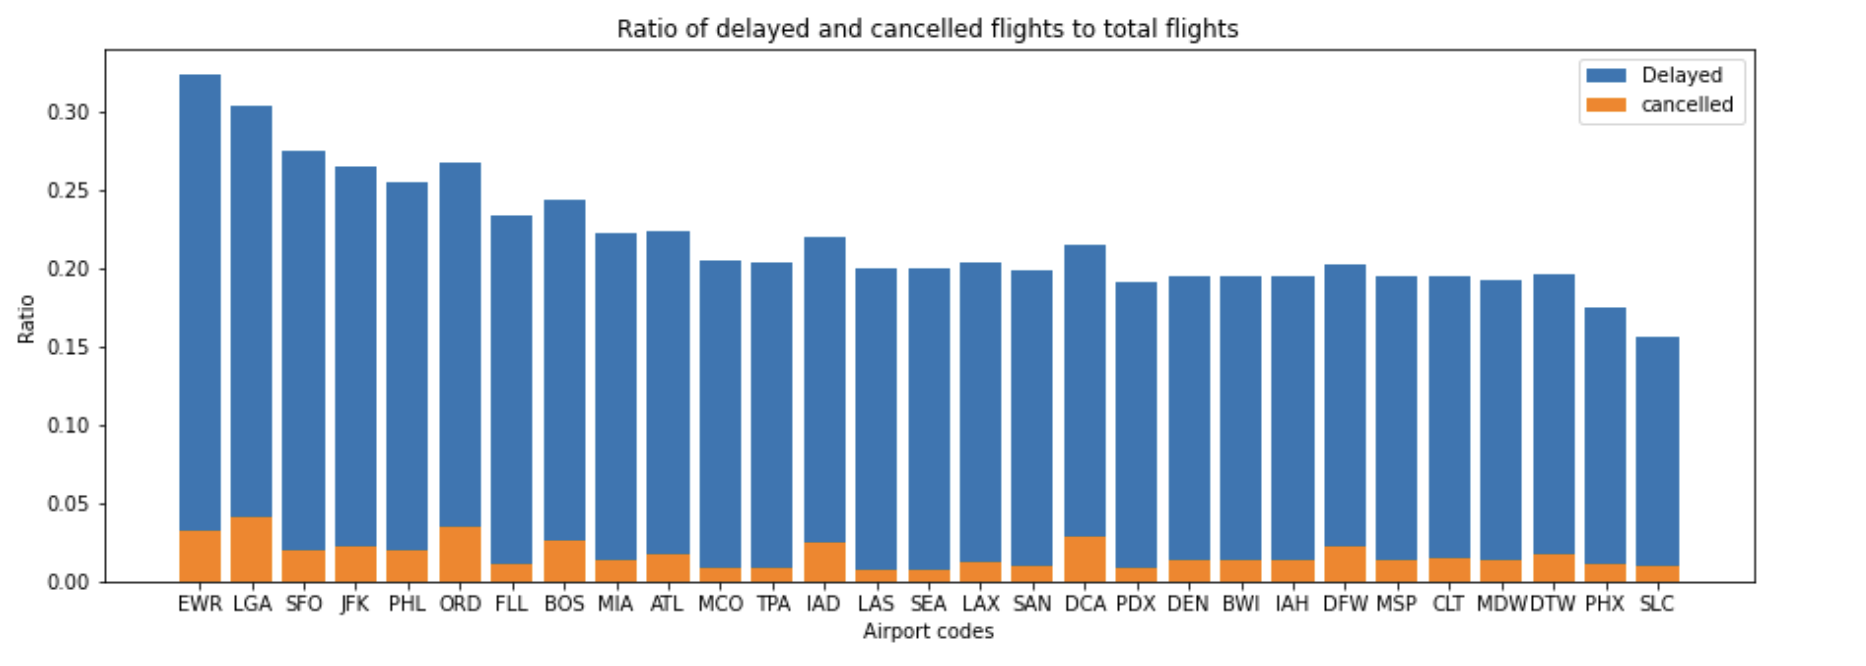 Bar chart with delays and cancellations ratios